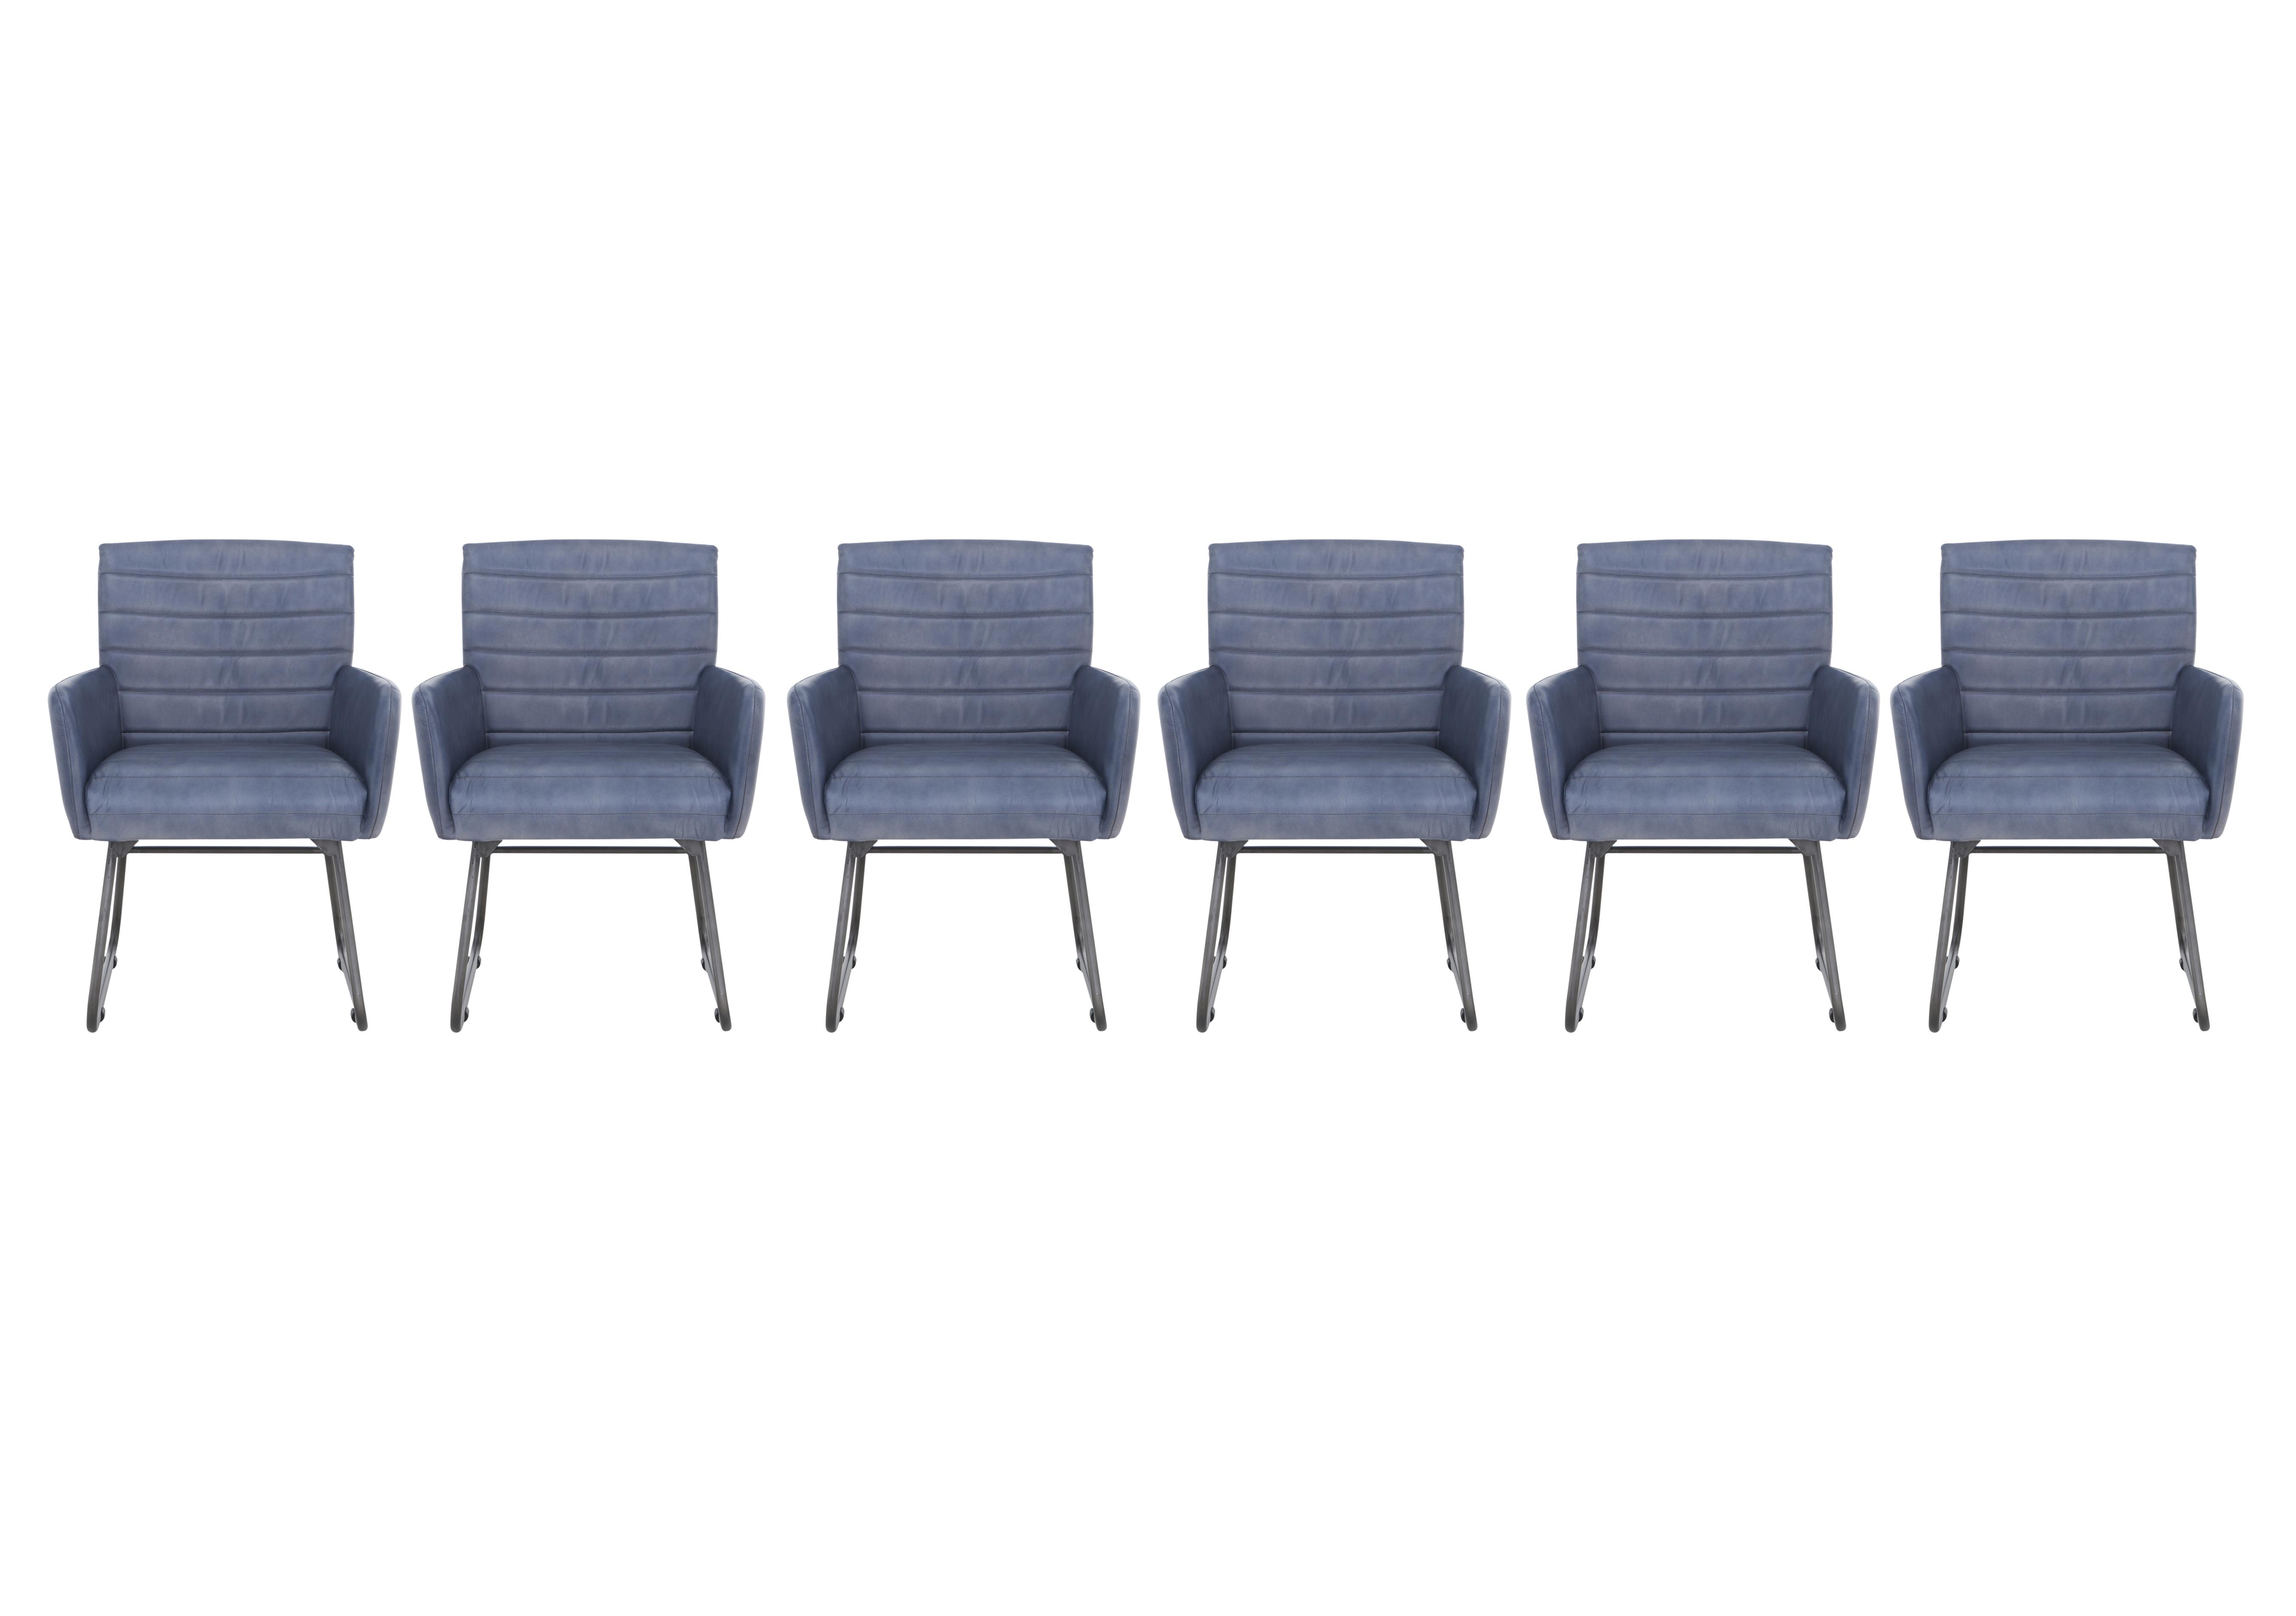 Sam Set of 6 Leather Dining Chairs in Steel Blue on Furniture Village